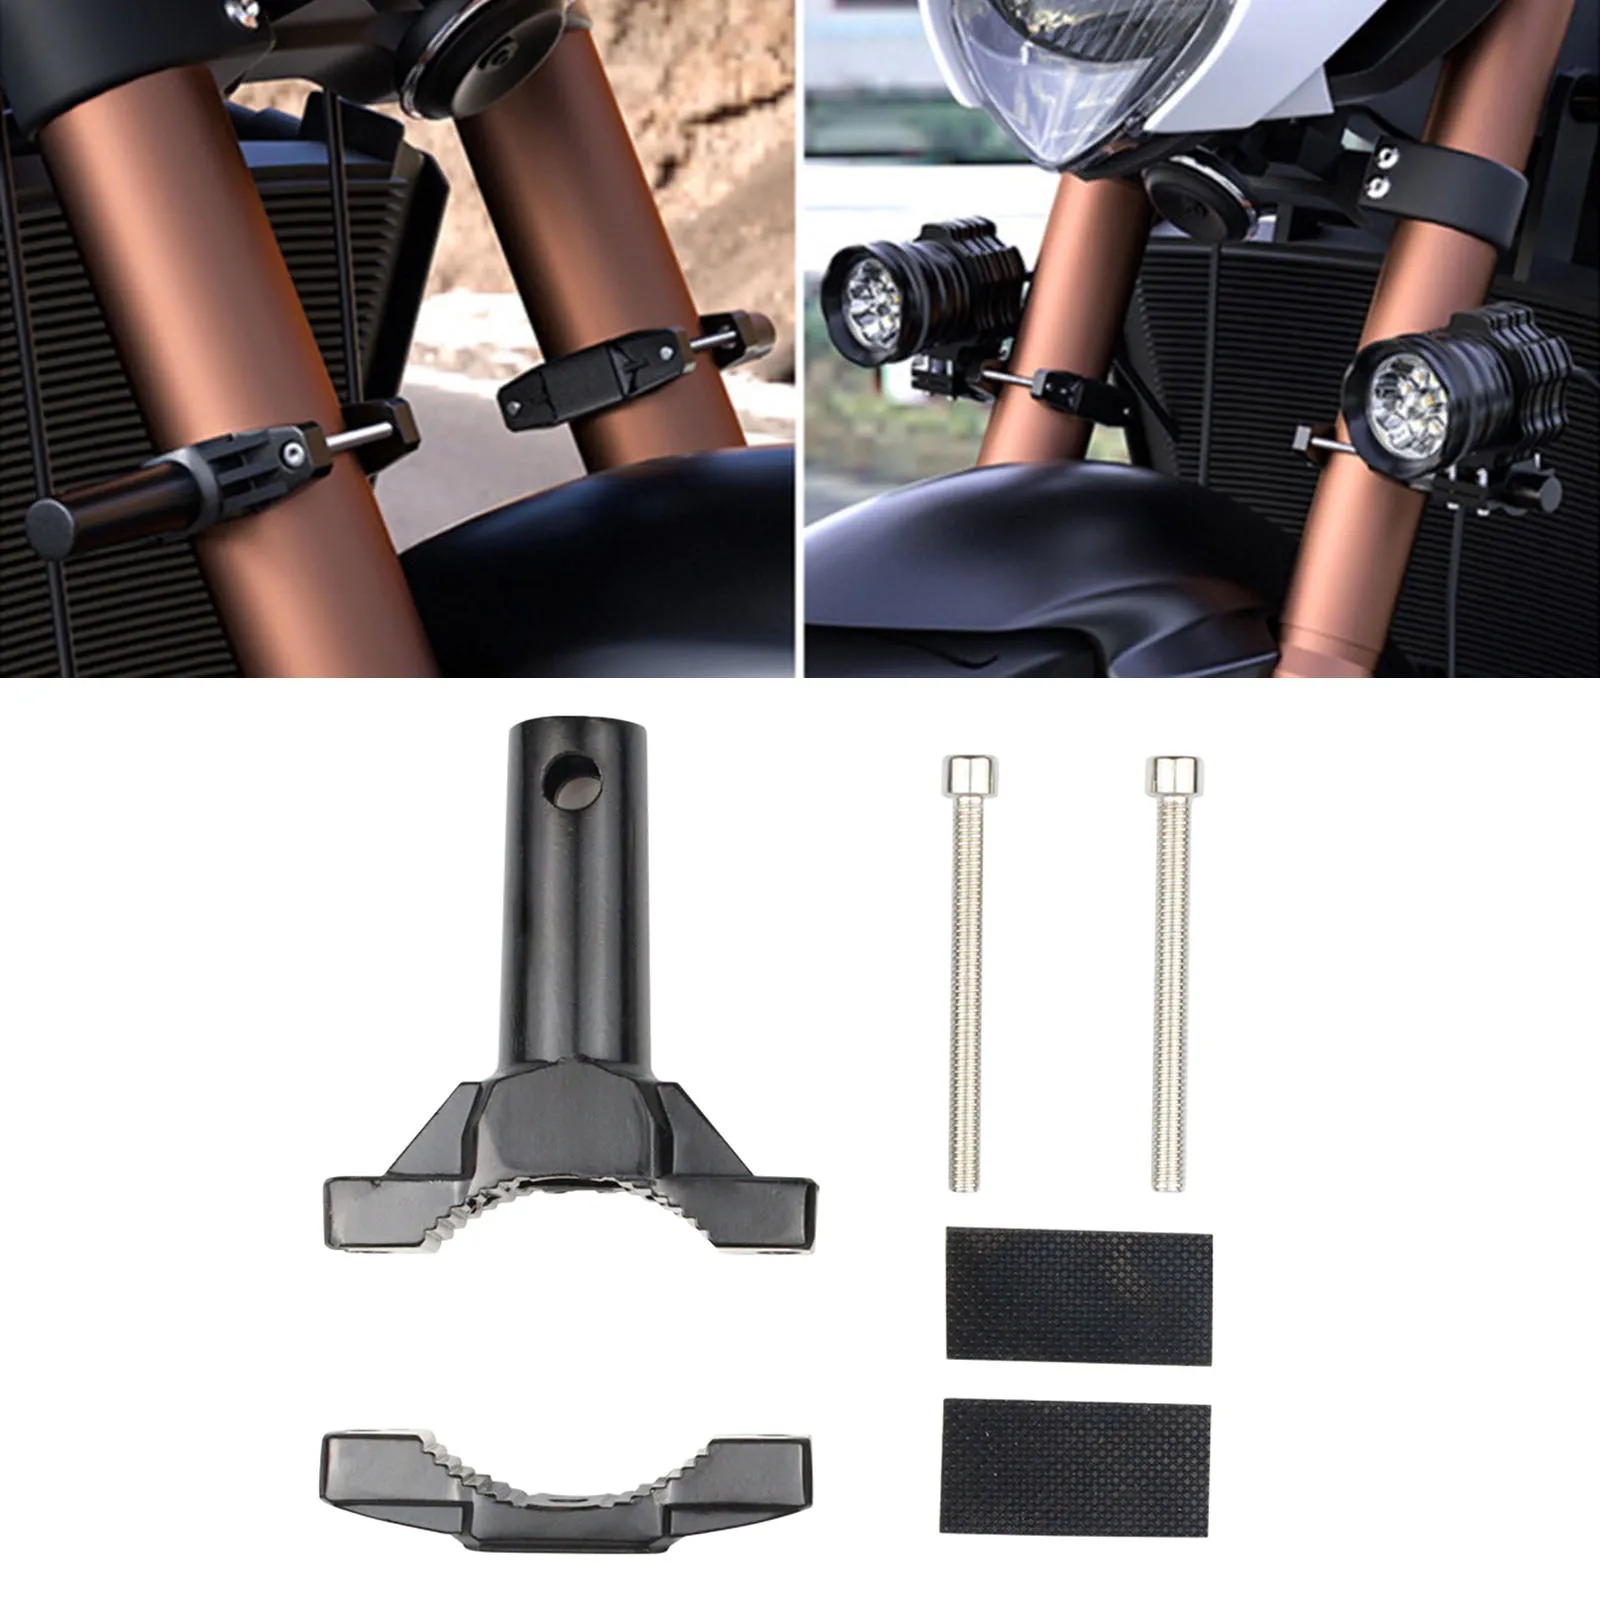 Universal Mount Bracket Clamp Mounting Brackets for Motorcycle Bumper LED Light Motorbikes Roll Cages Fits 20-55mm Fork Tube